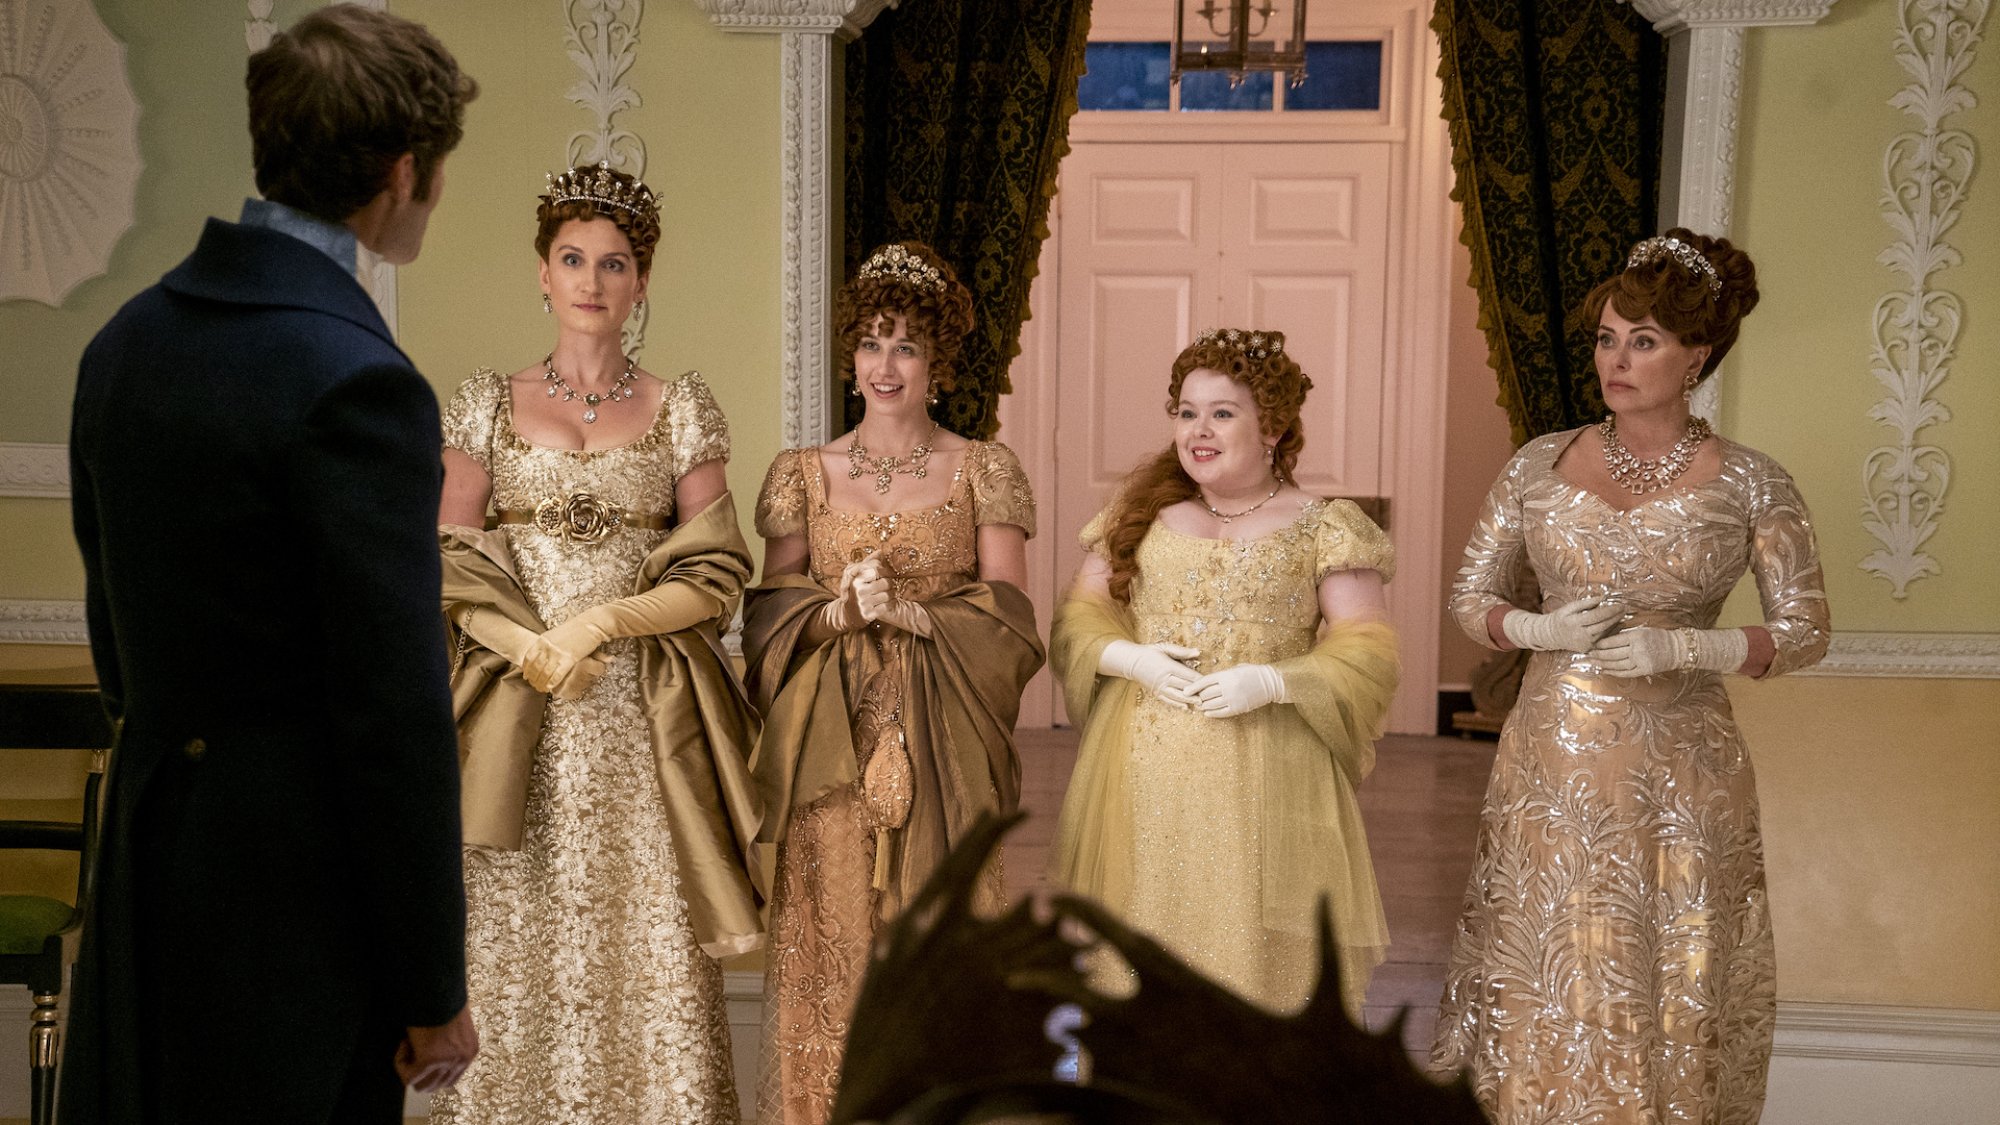 Rupert Young as Lord Jack Featherington, Bessie Carter as Prudence Featherington, Harriet Cains as Philipa Featherington, Nicola Coughlan as Penelope Featherington, Polly Walker as Lady Portia Featherington, standing in a row in the show "Bridgerton"